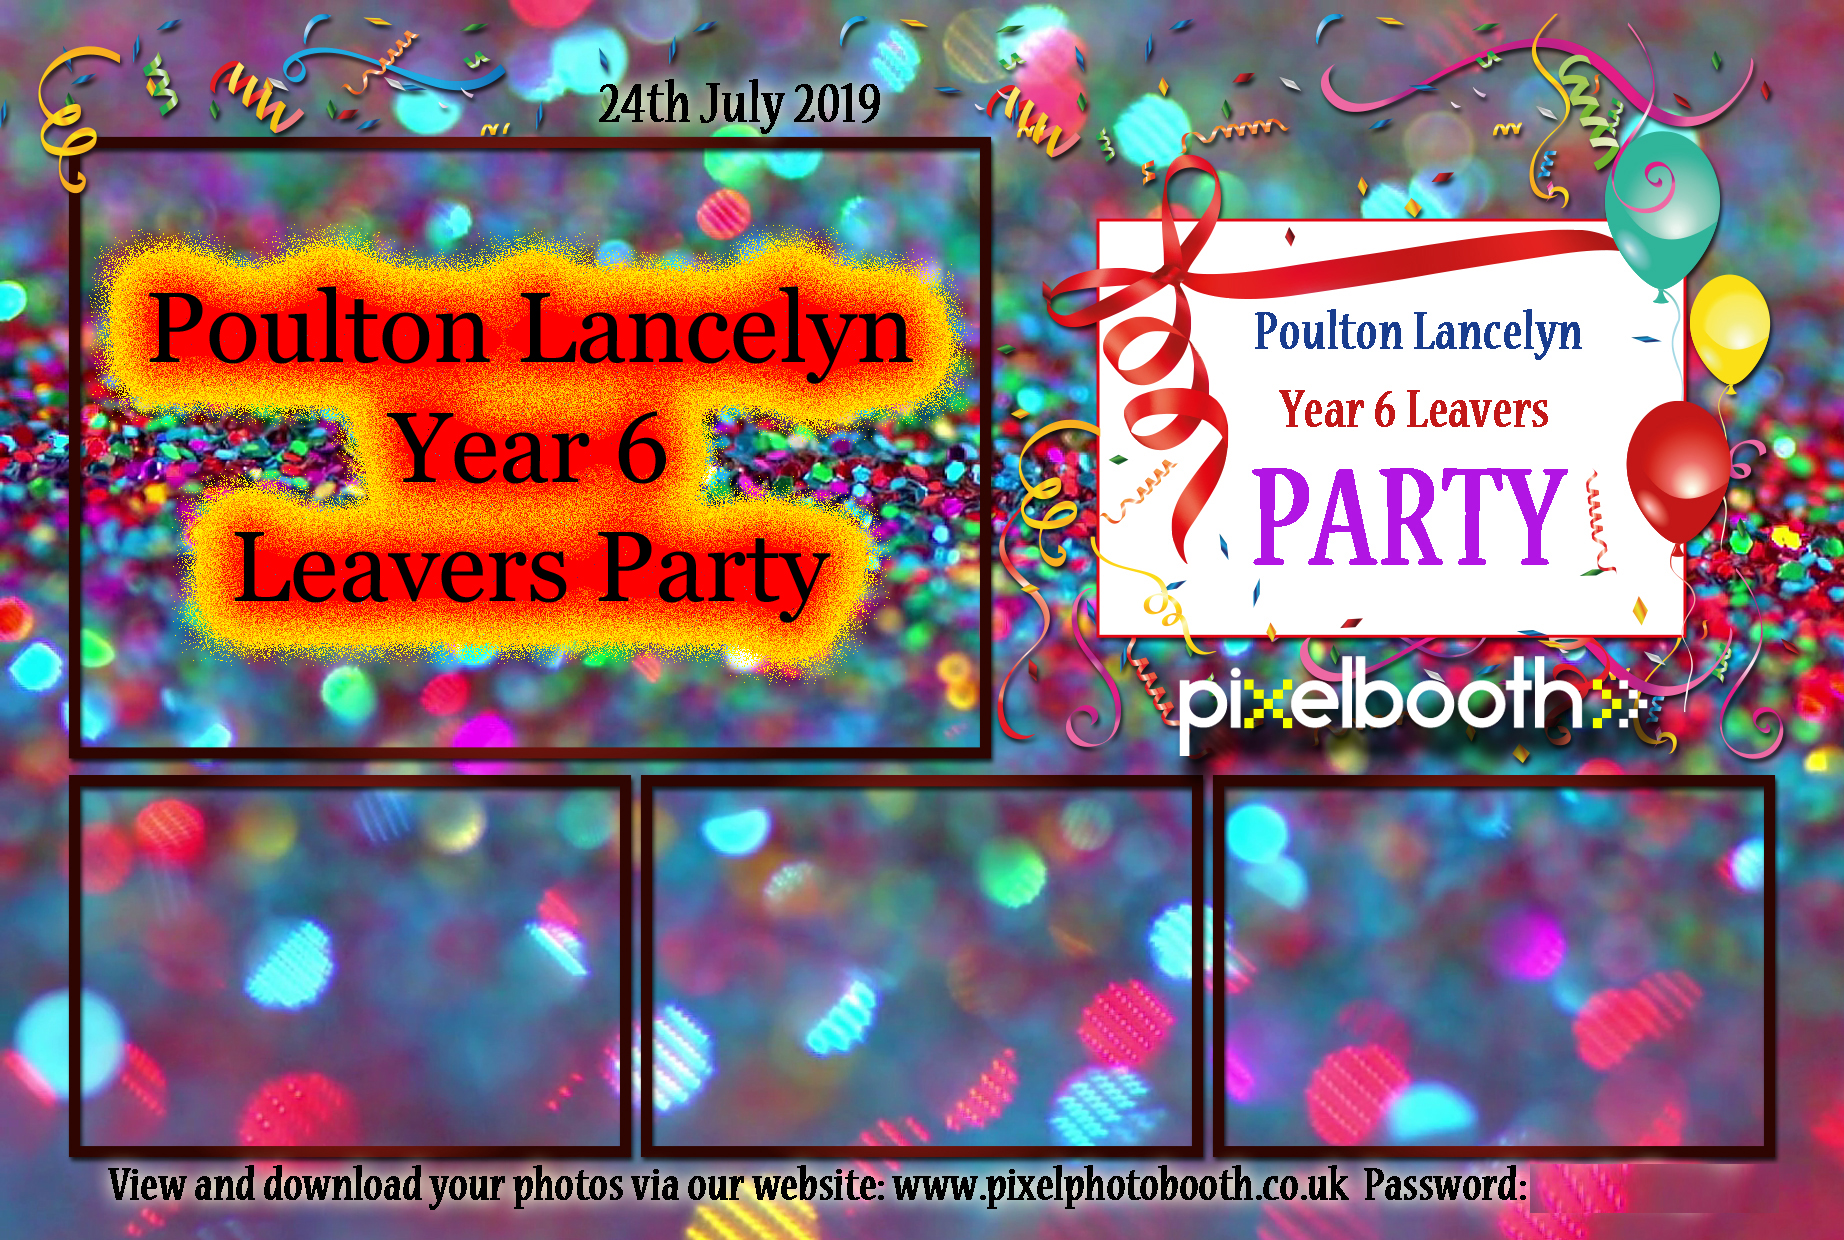 24th July 2019: Poulton Lancelyn Year 6 Leavers Party at The Village Hotel